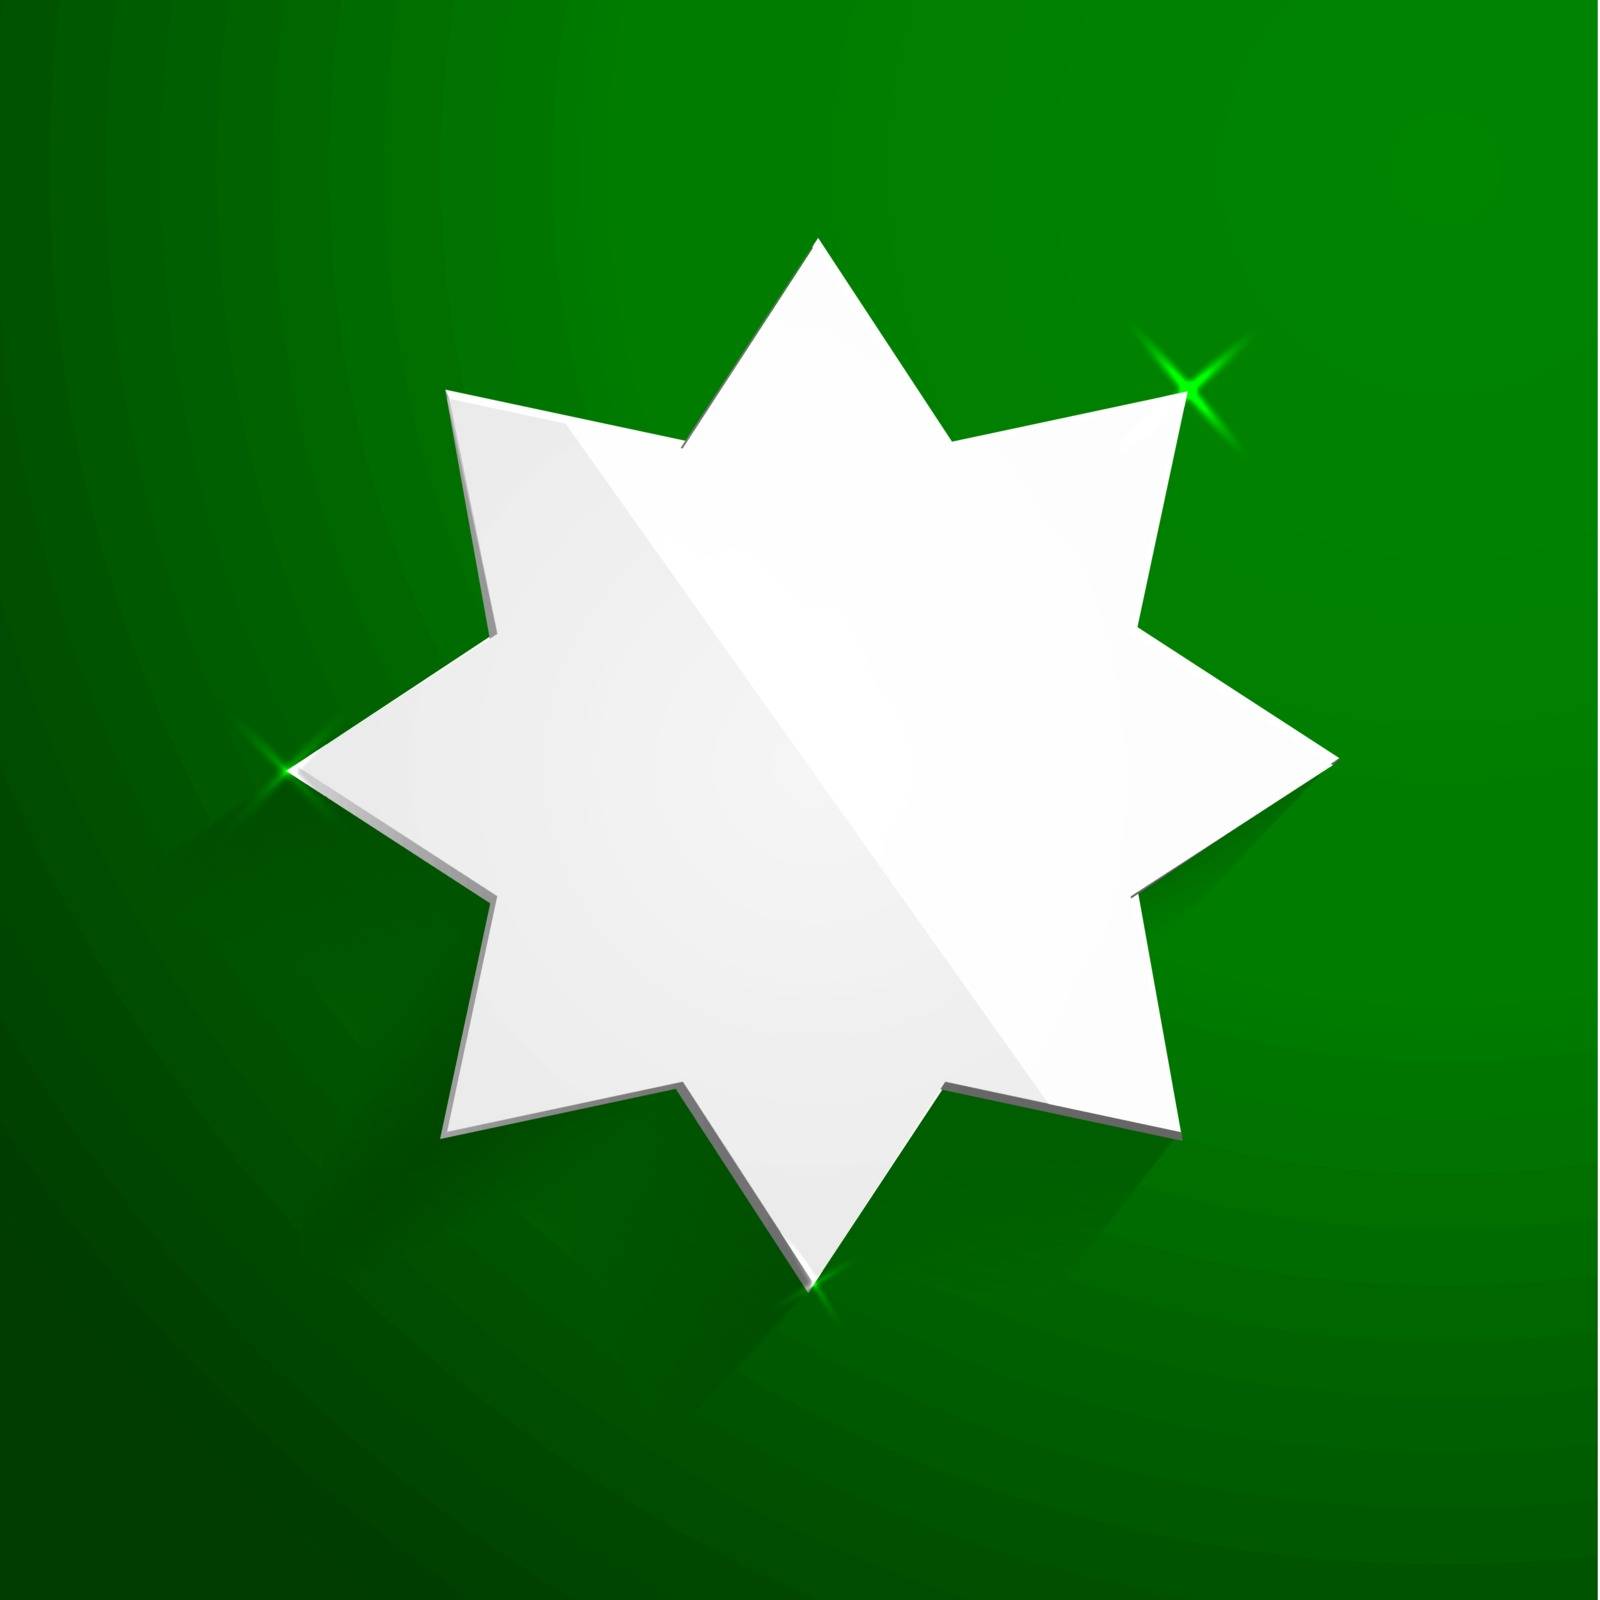 The green background with white blank star